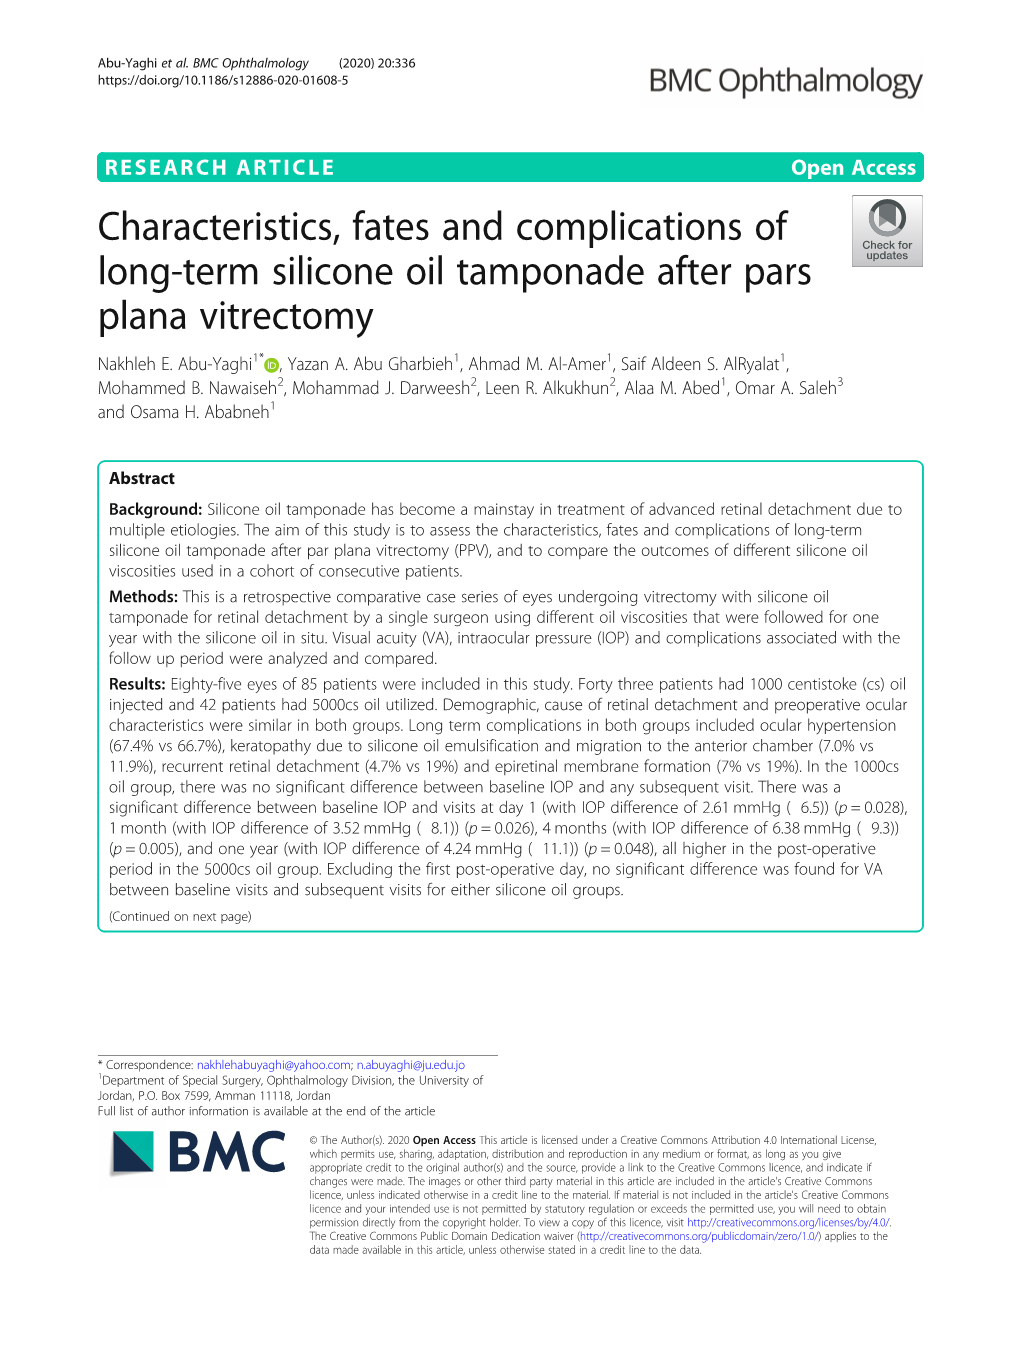 Characteristics, Fates and Complications of Long-Term Silicone Oil Tamponade After Pars Plana Vitrectomy Nakhleh E